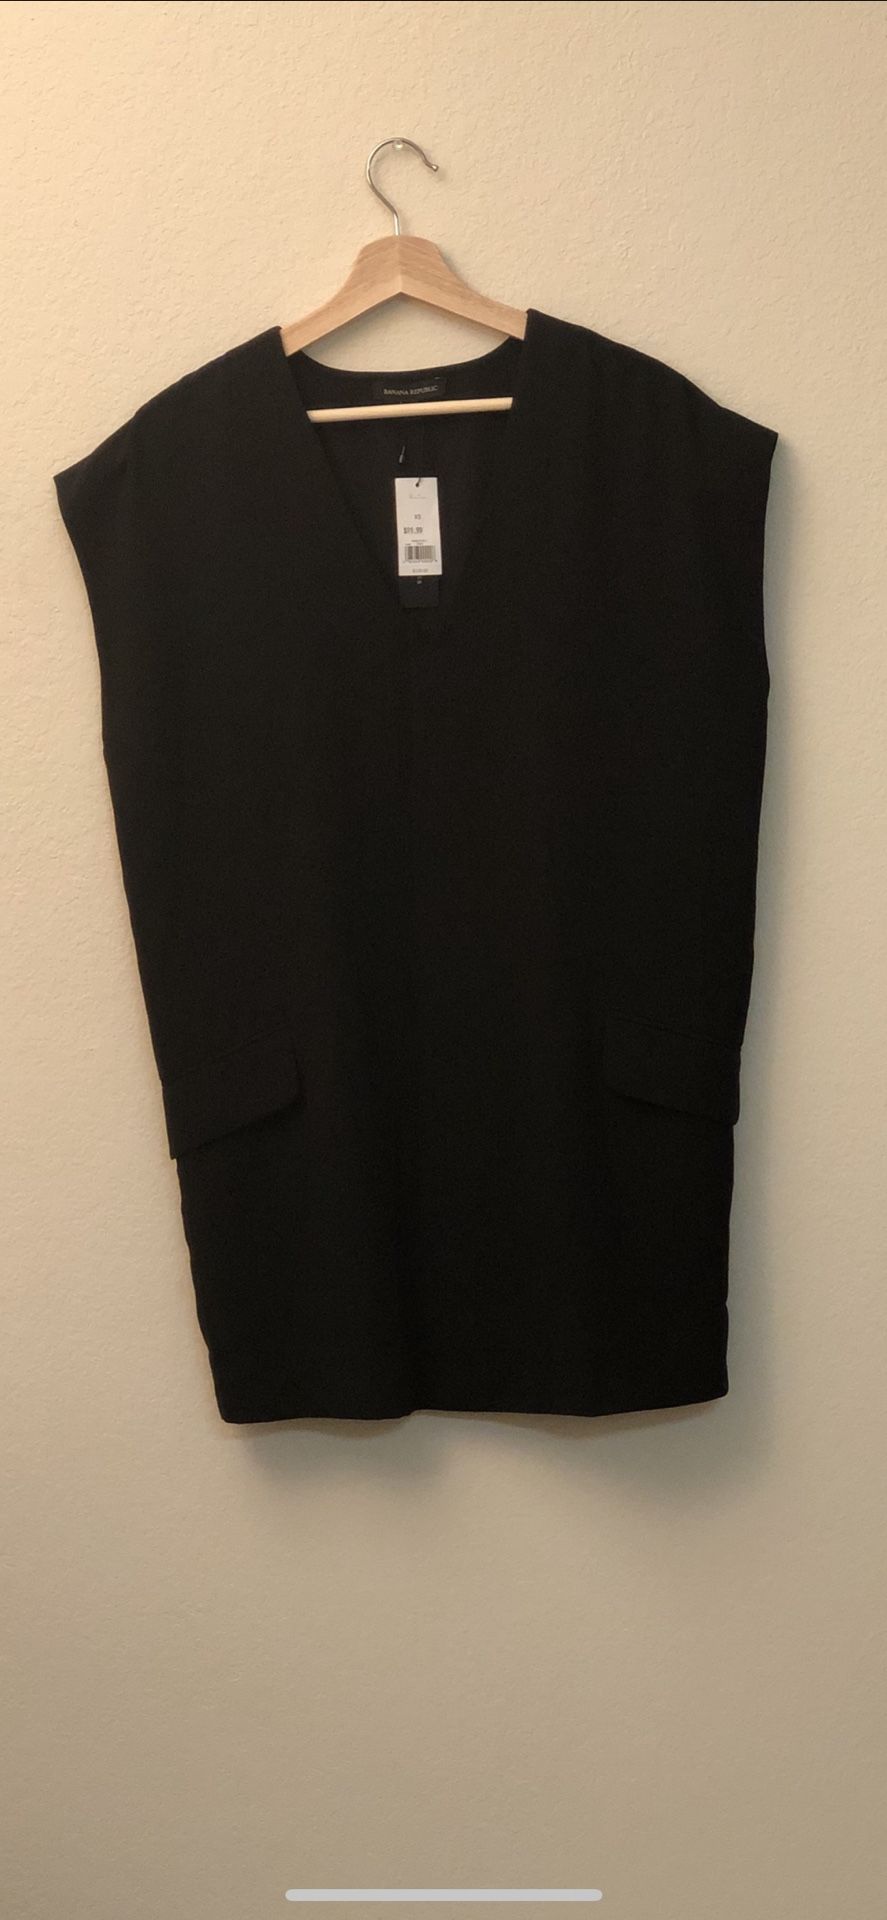 Banana republic black cocoon dress - New with tags